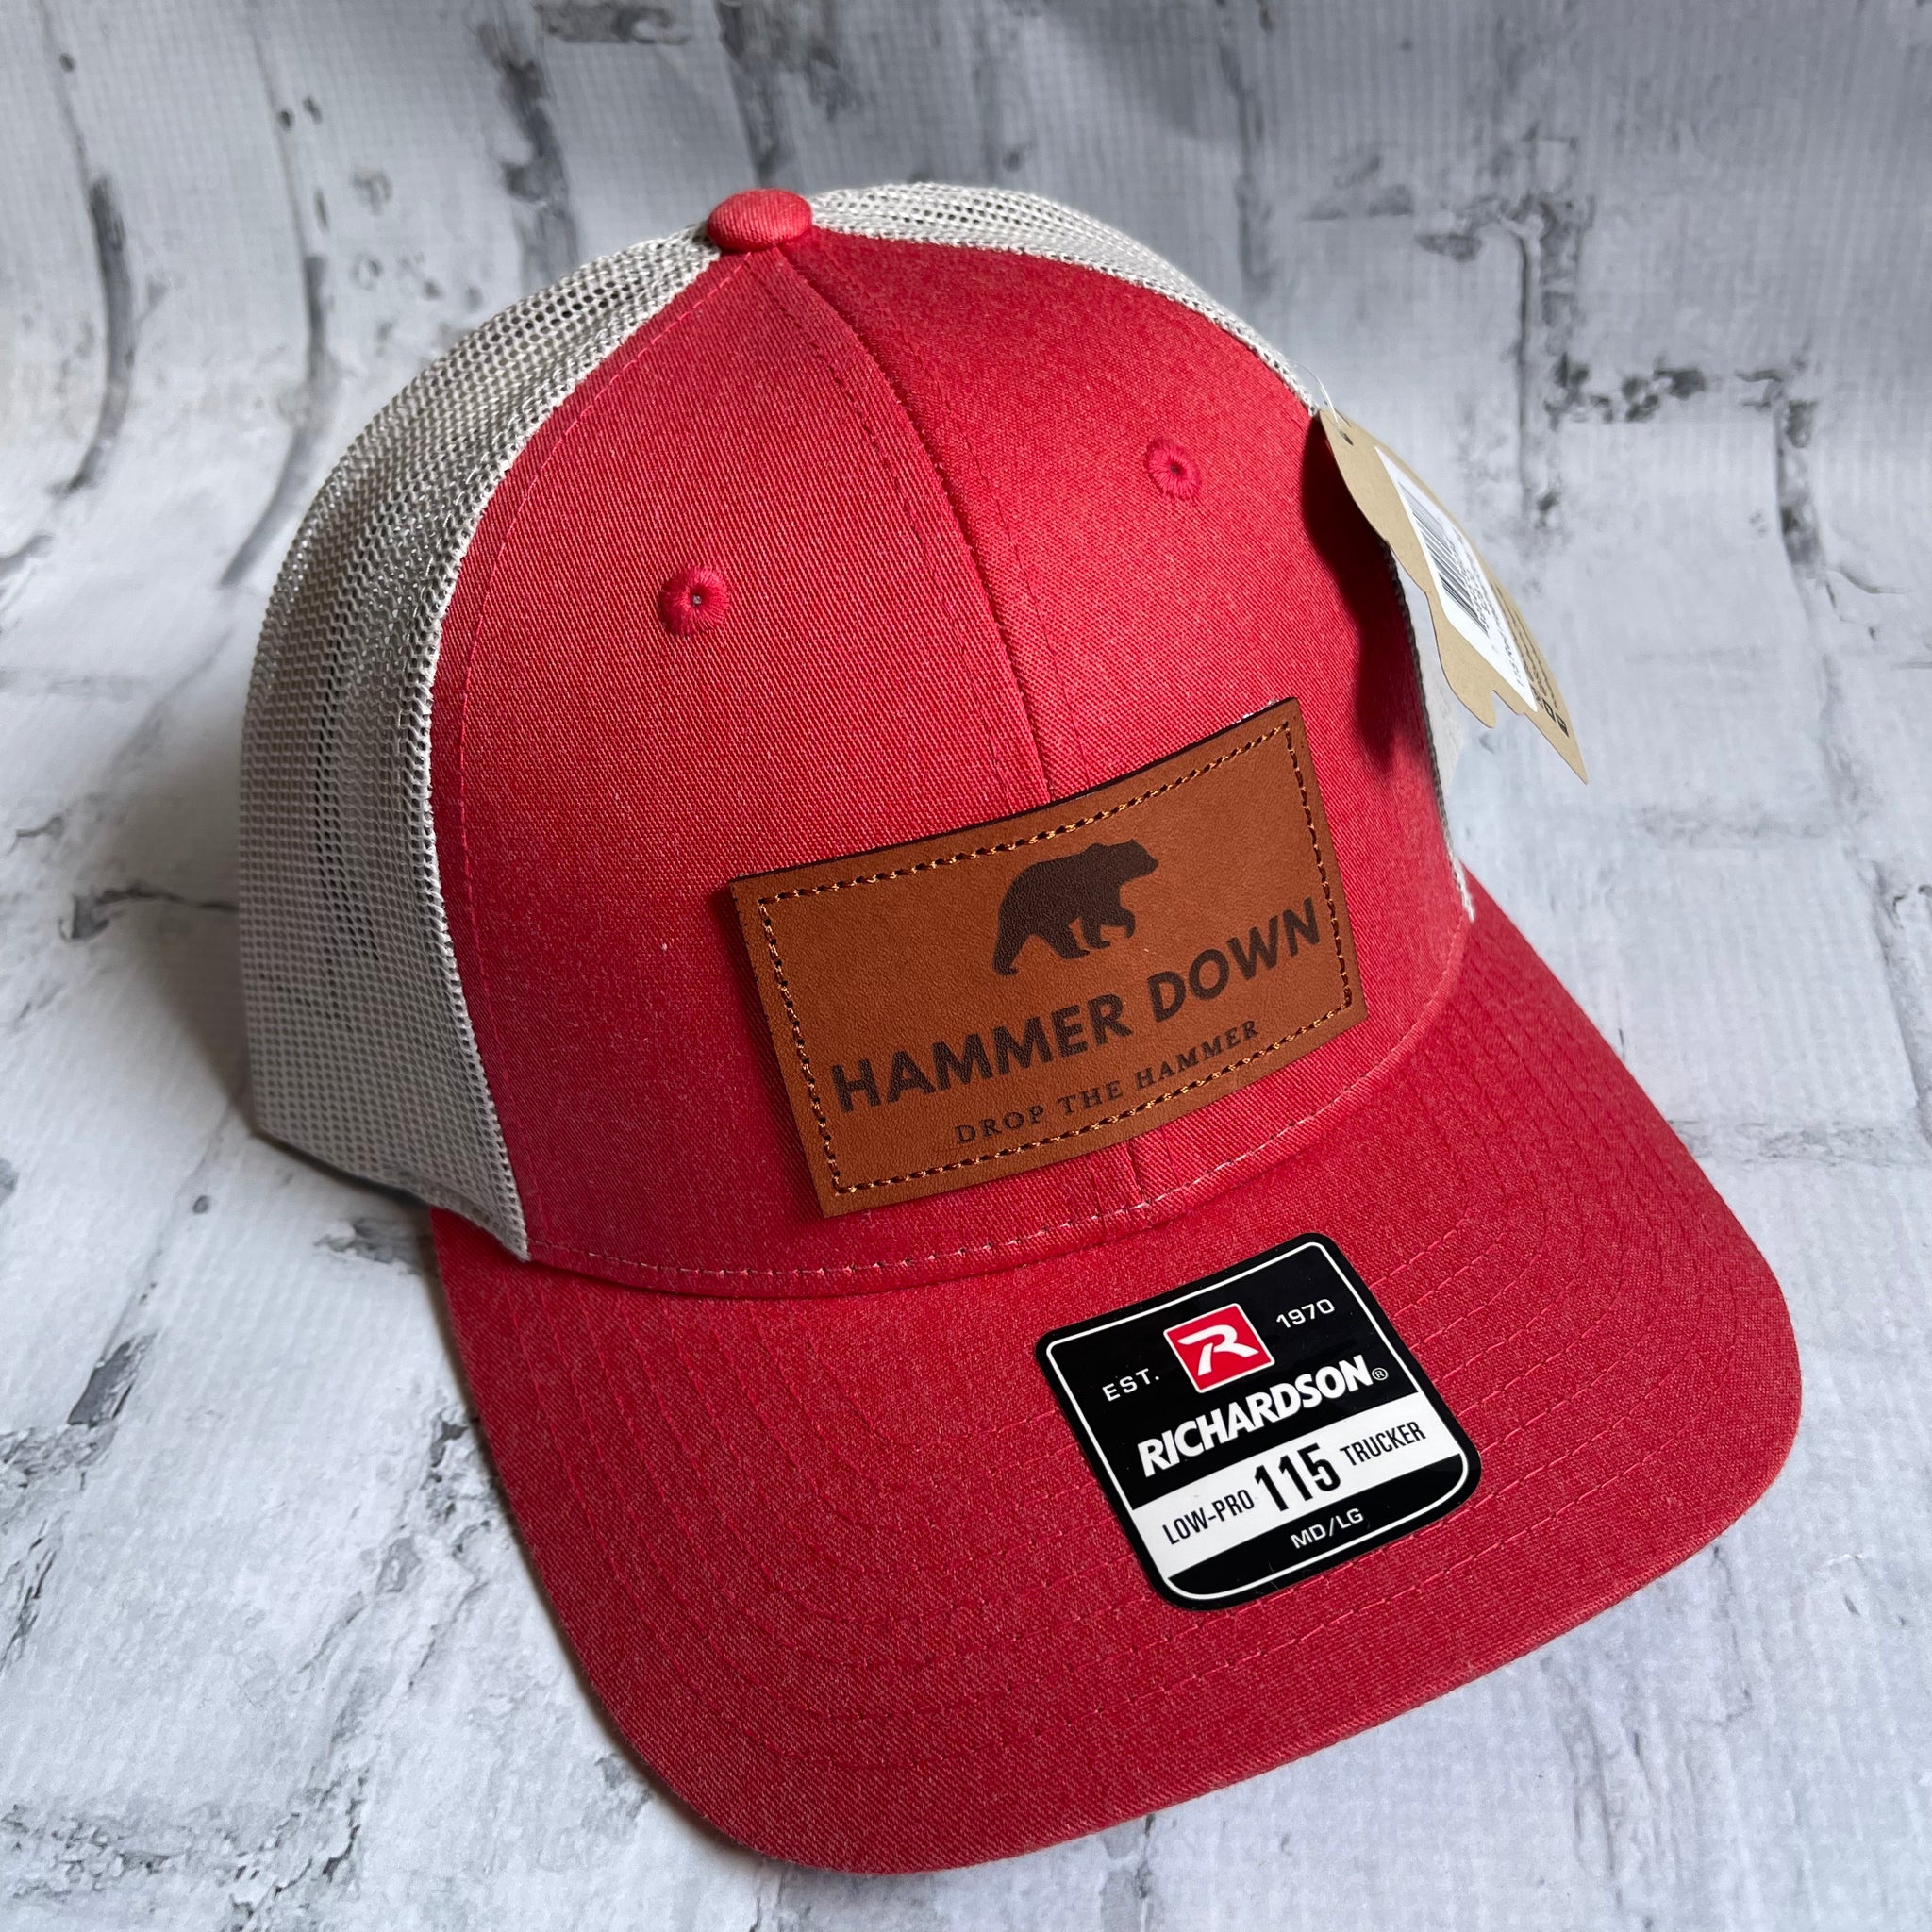 Hammer Down "DTH Bear" Hat - Red with Leather Patch - Southern Charm "Shop The Charm"